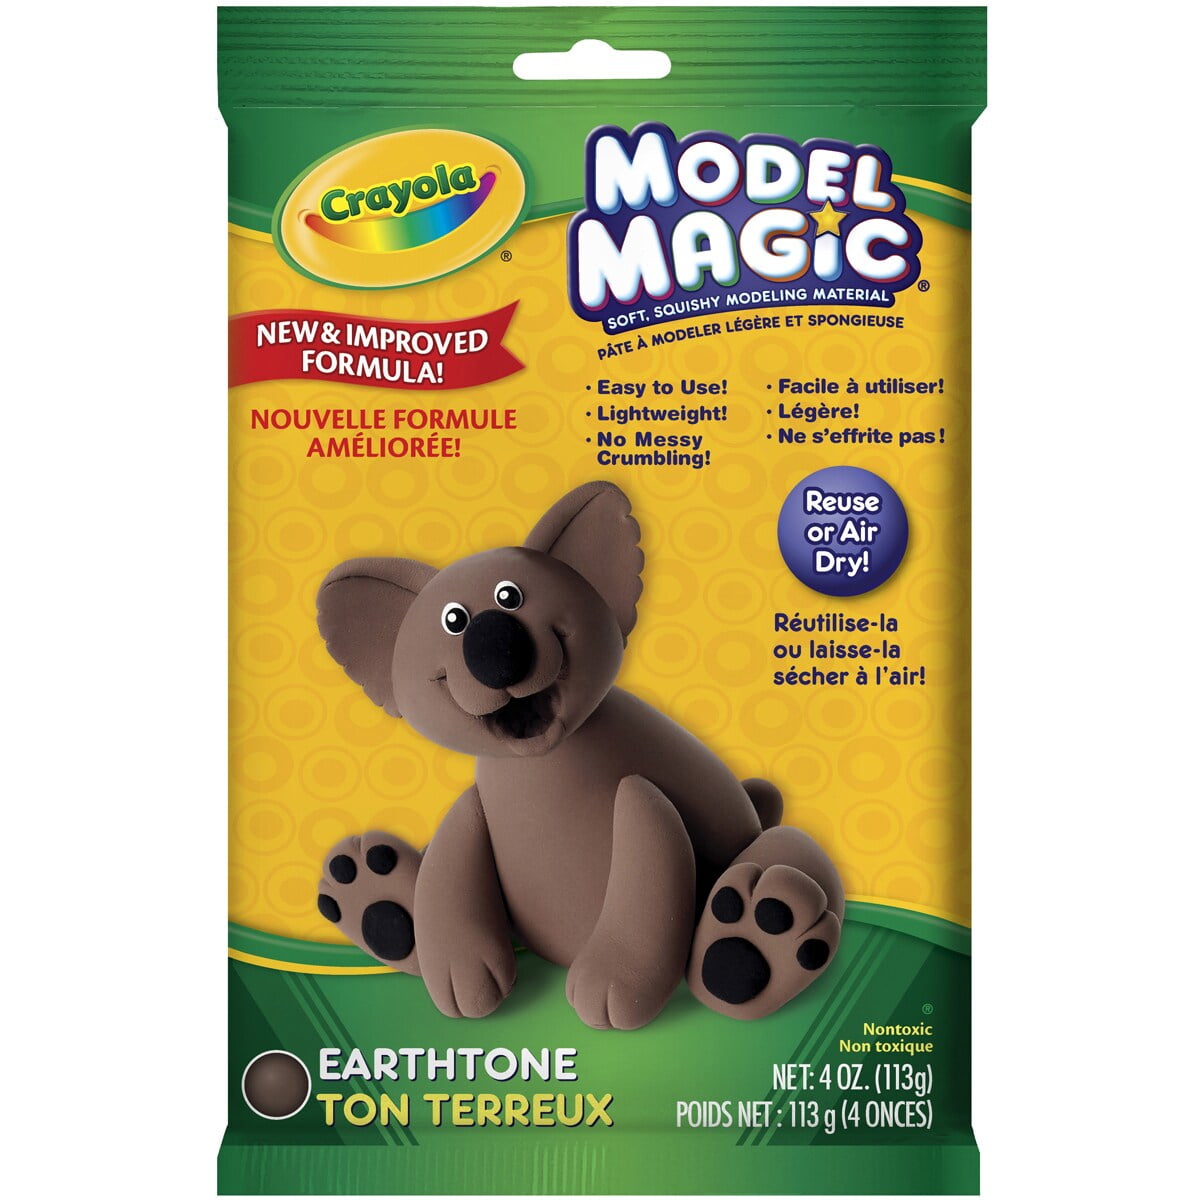 4 Crayola Model Magic Make and Learn Activity Packet - FOR Modeling Clay -  NEW